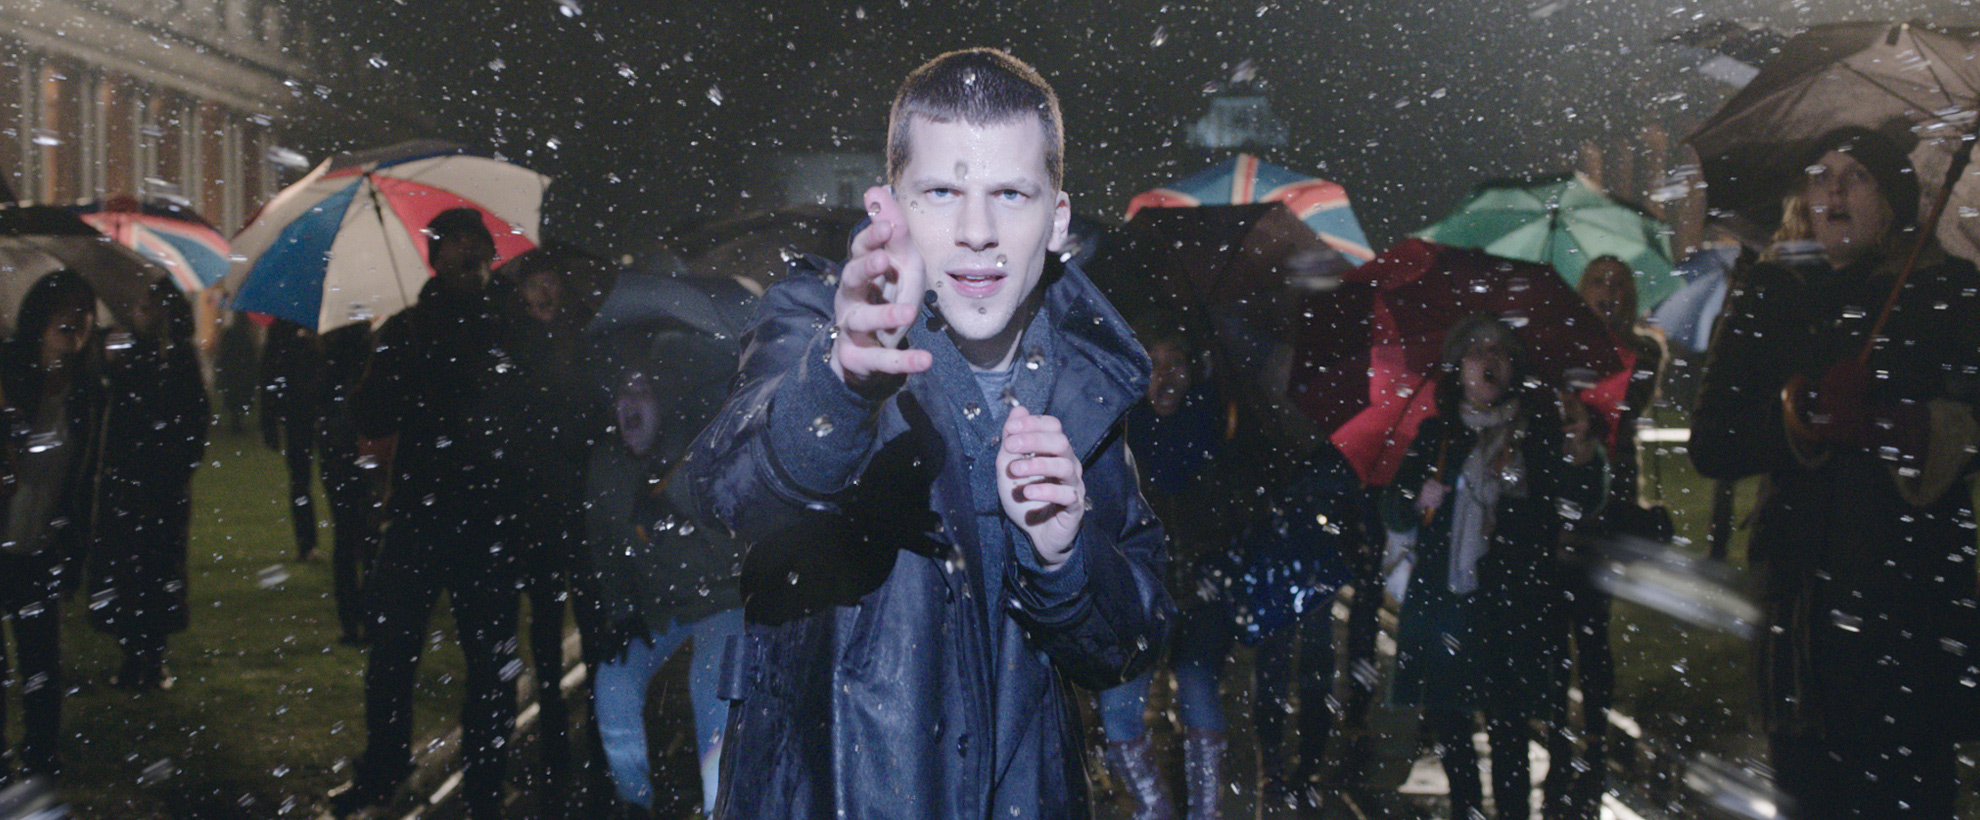 actor jesse eisenberg as j daniel atlas holding his hands in front of his chest as he is conjuring water droplets in the air. there are people with umbrellas walking by